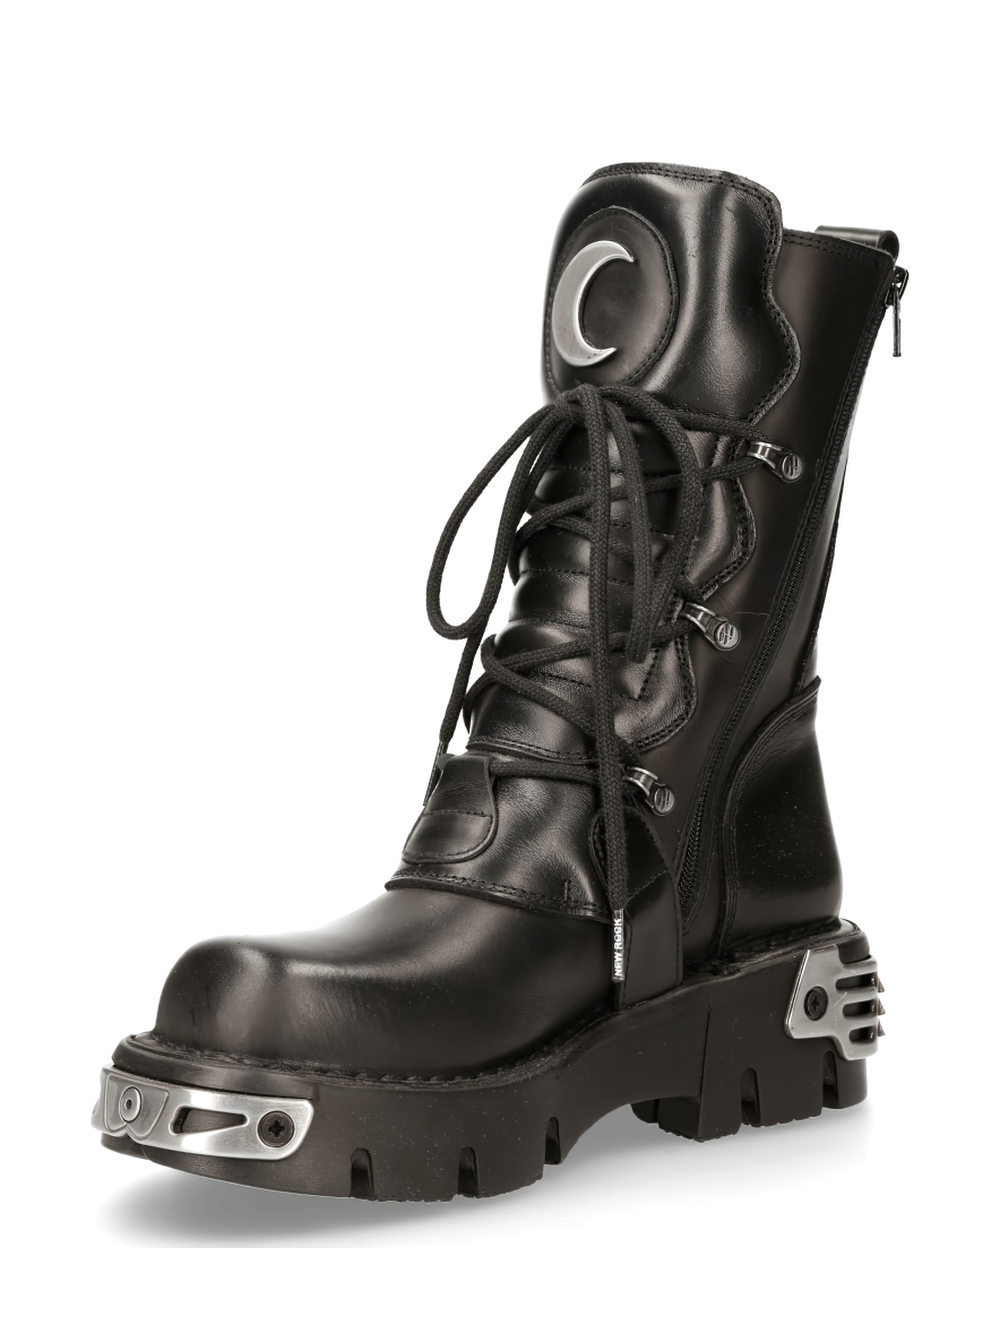 NEW ROCK Gothic Boots with Platform Sole and Crescent Moon